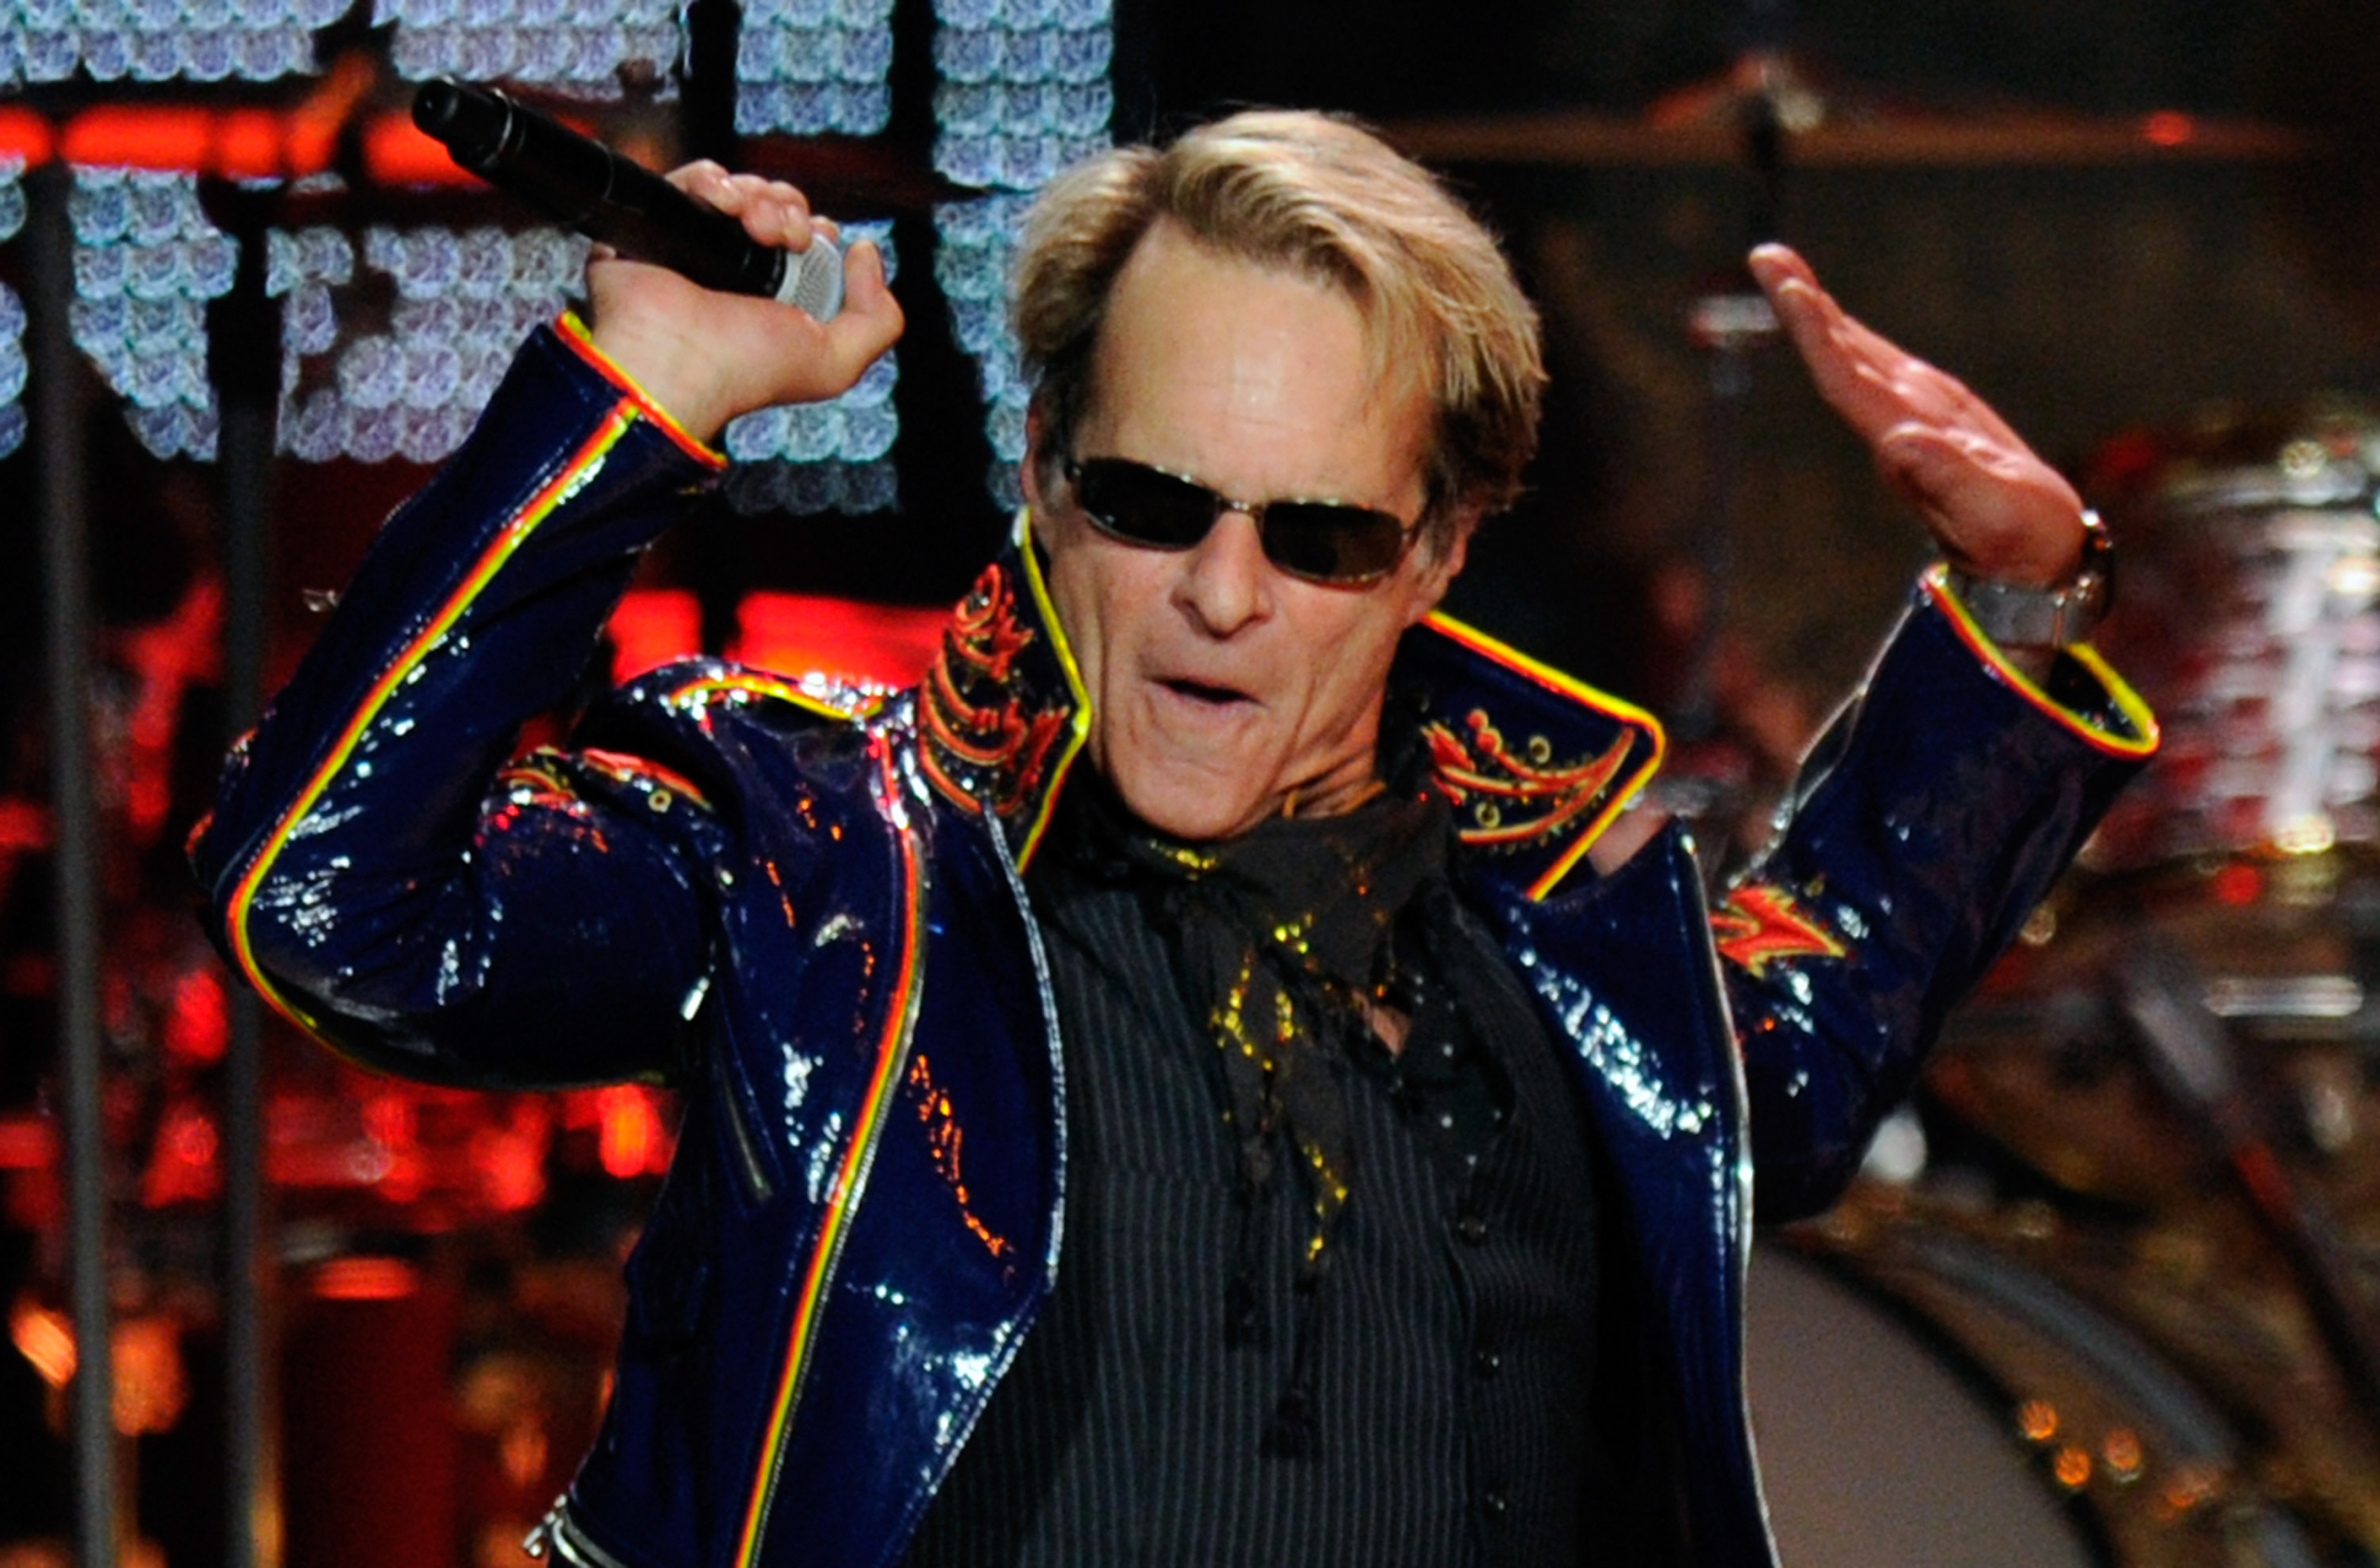 New David Lee Roth song pays tribute to band mates!